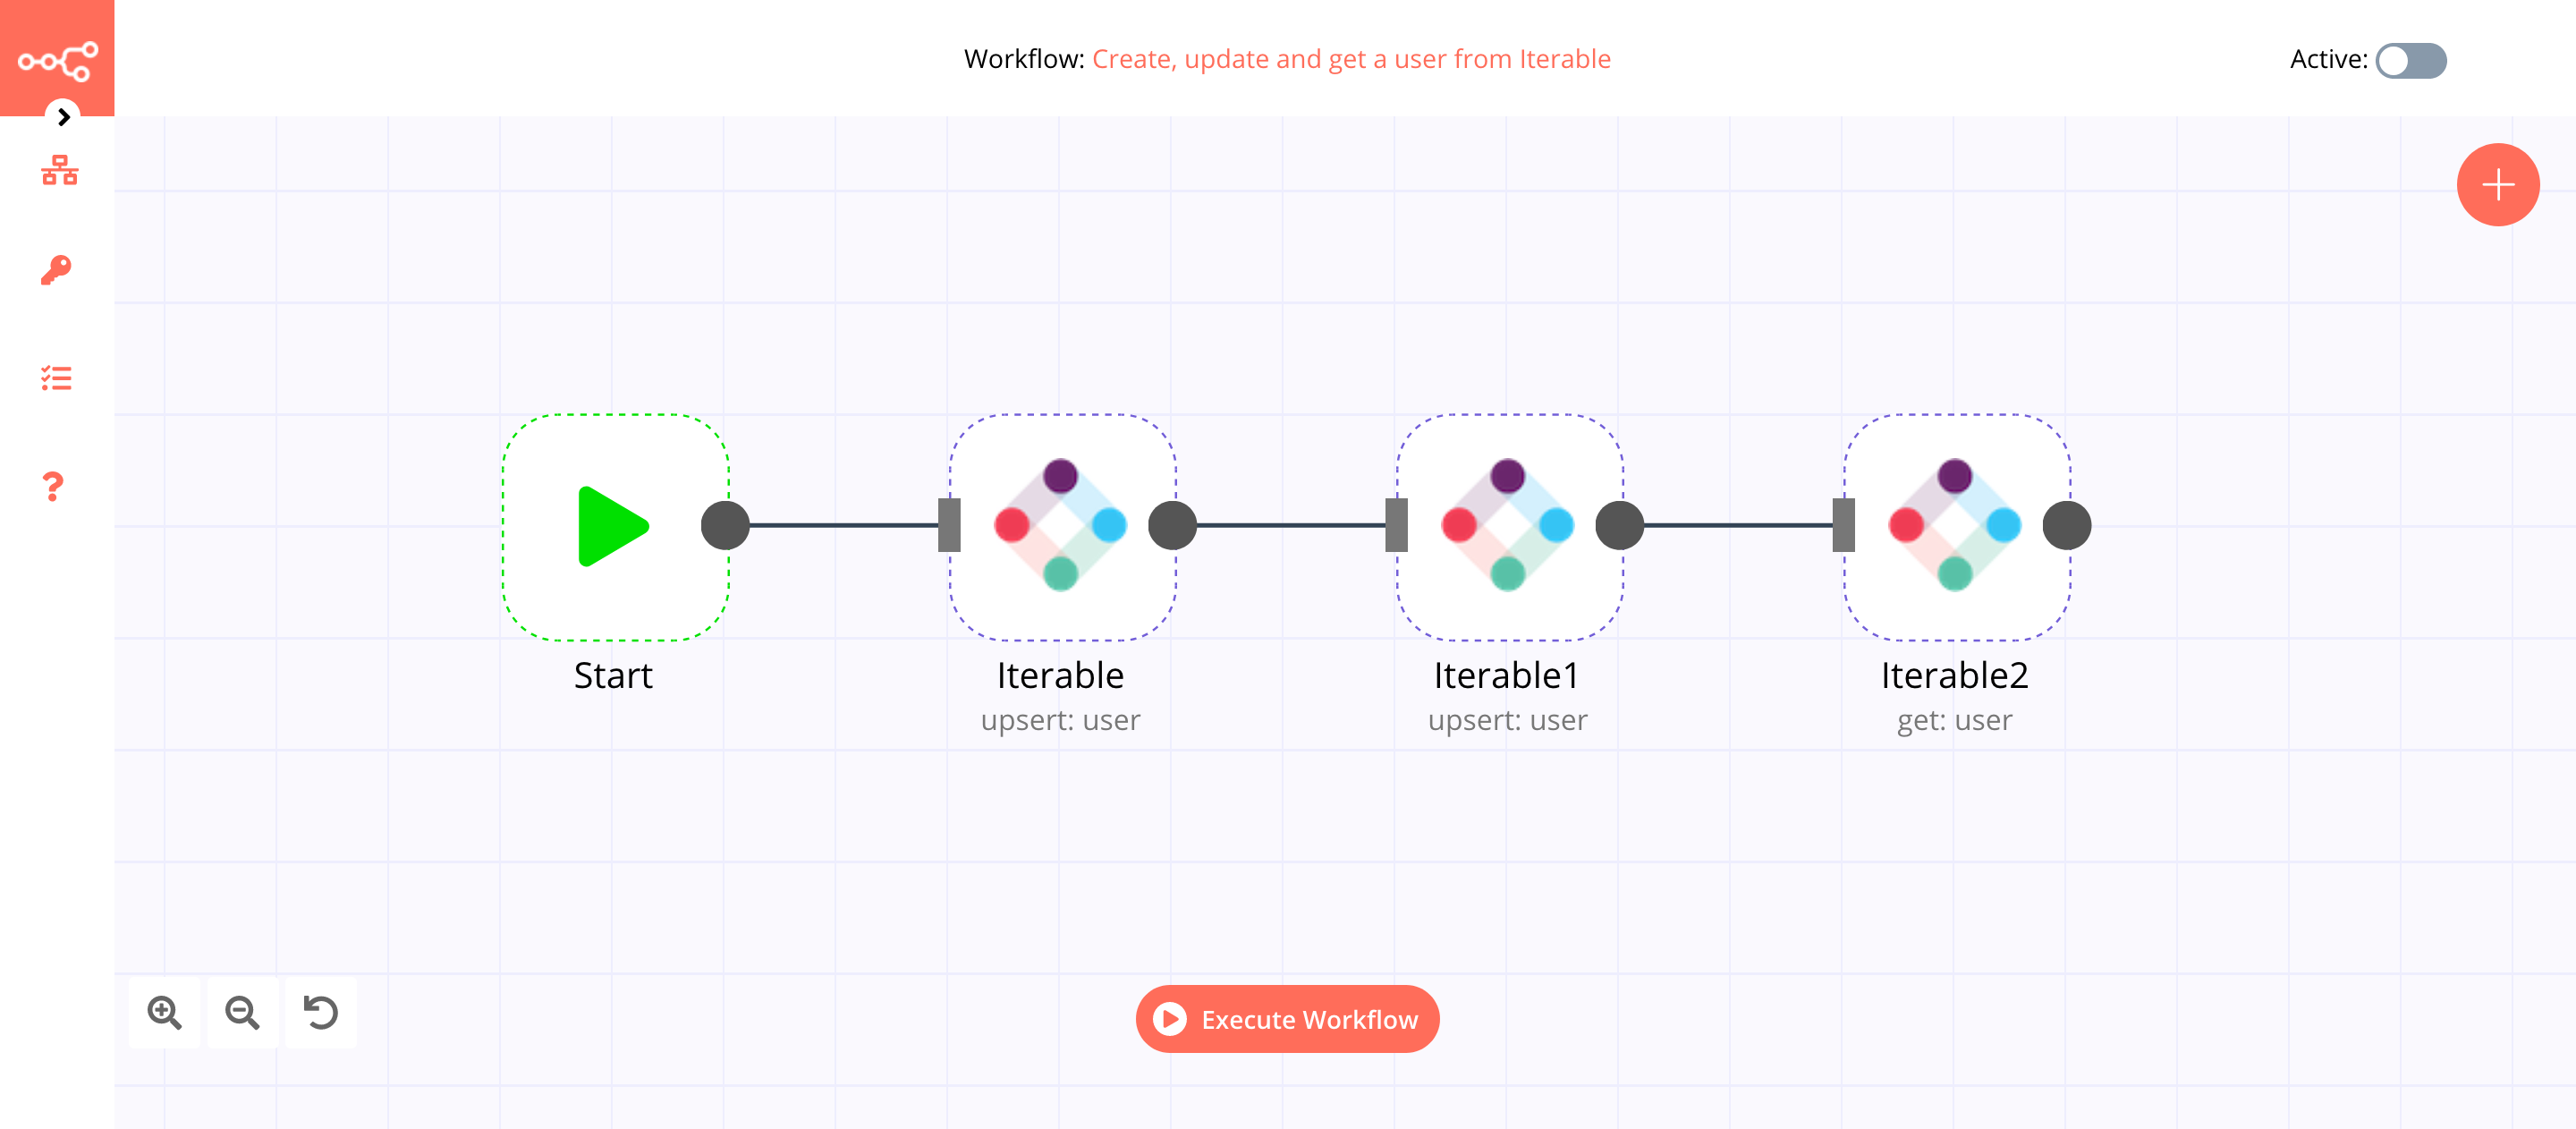 A workflow with the Iterable node